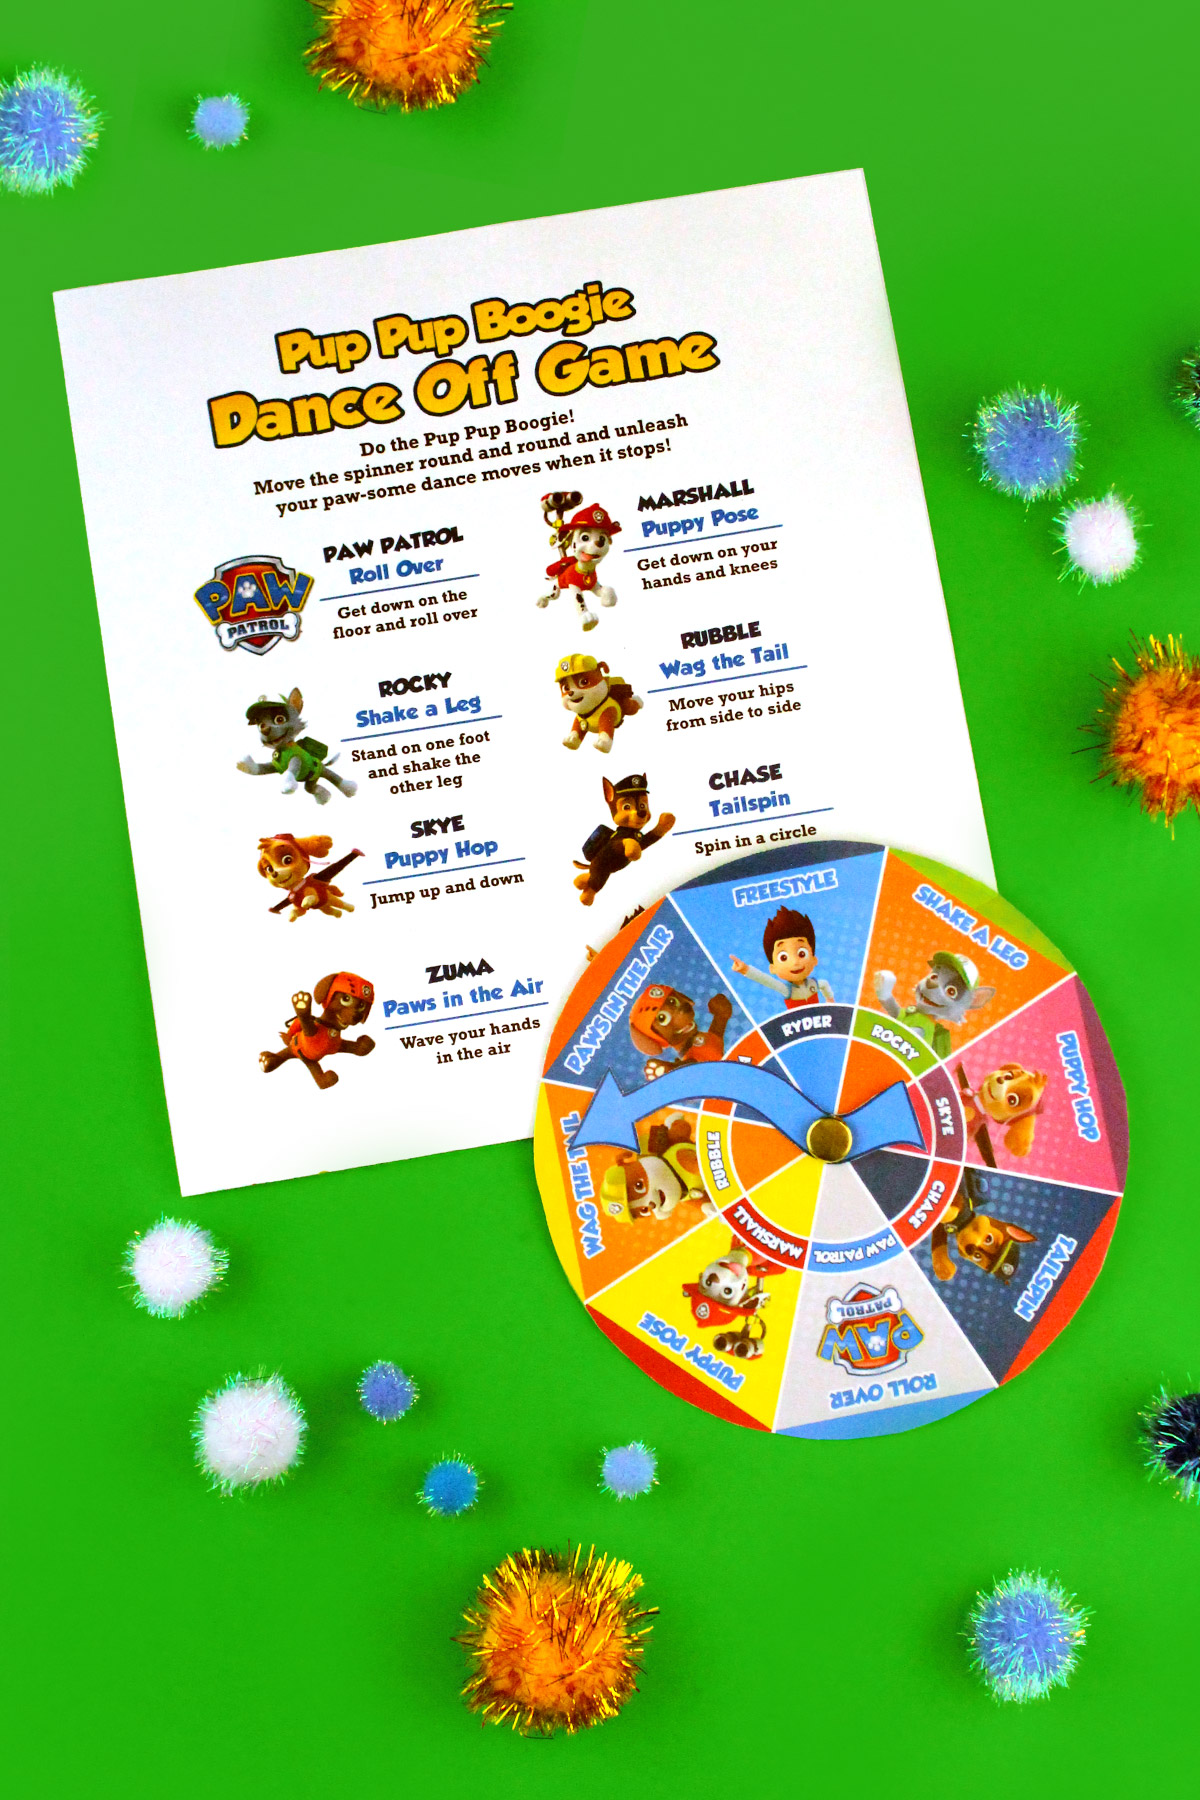 PAW Patrol Pup Pup Boogie Game